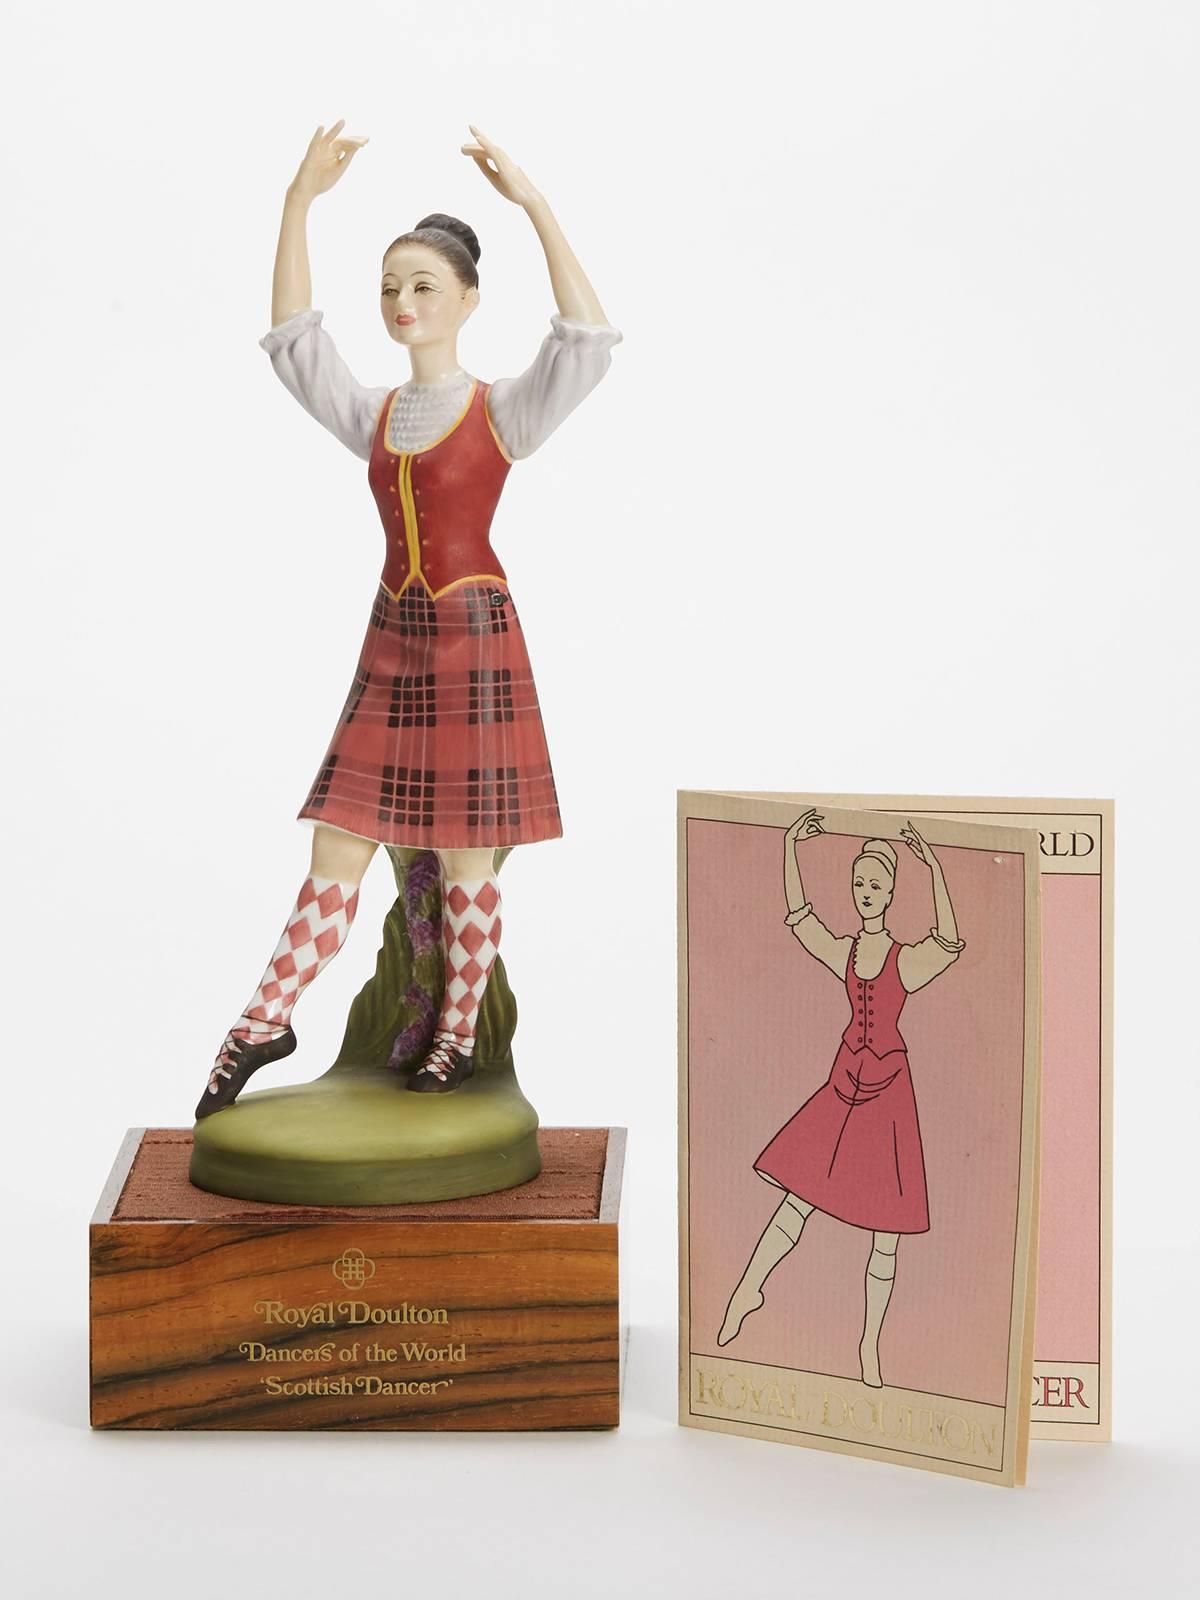 Originating from a private collection a vintage limited edition Royal Doulton Dancers of the World series porcelain figurine titled Kurdish Dancer and numbered HN2436. Designed by Peggy Davies the figure is one of 12 figures produced by Royal